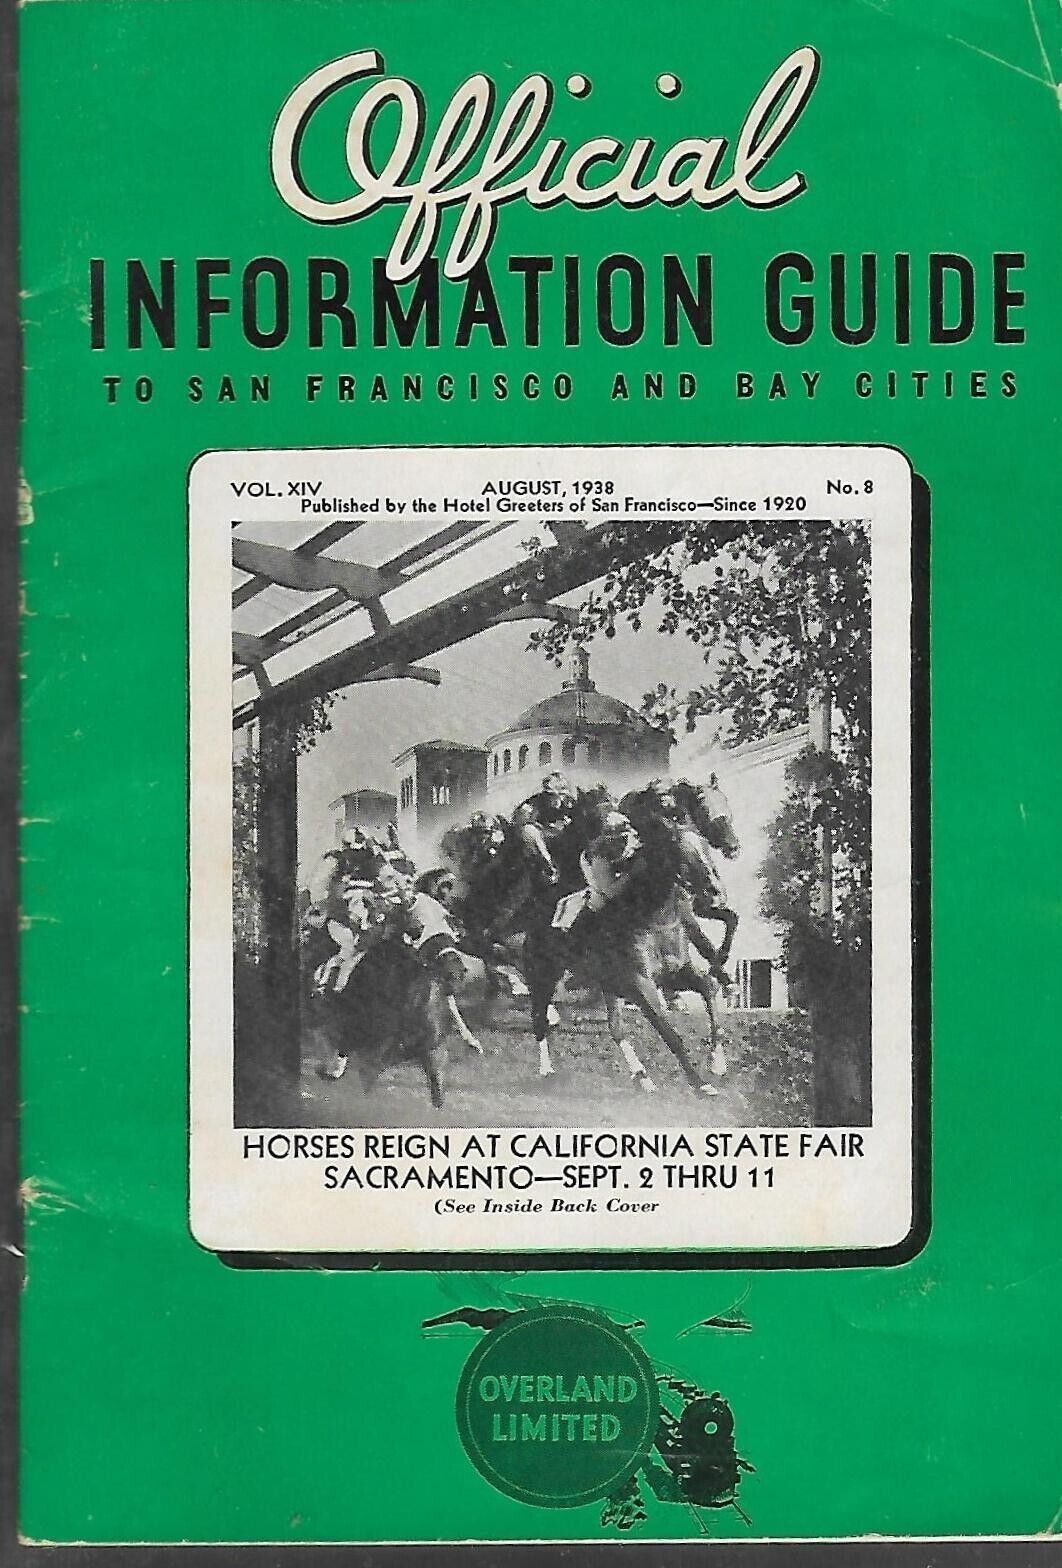 1938 Official Information Guide to San Francisco